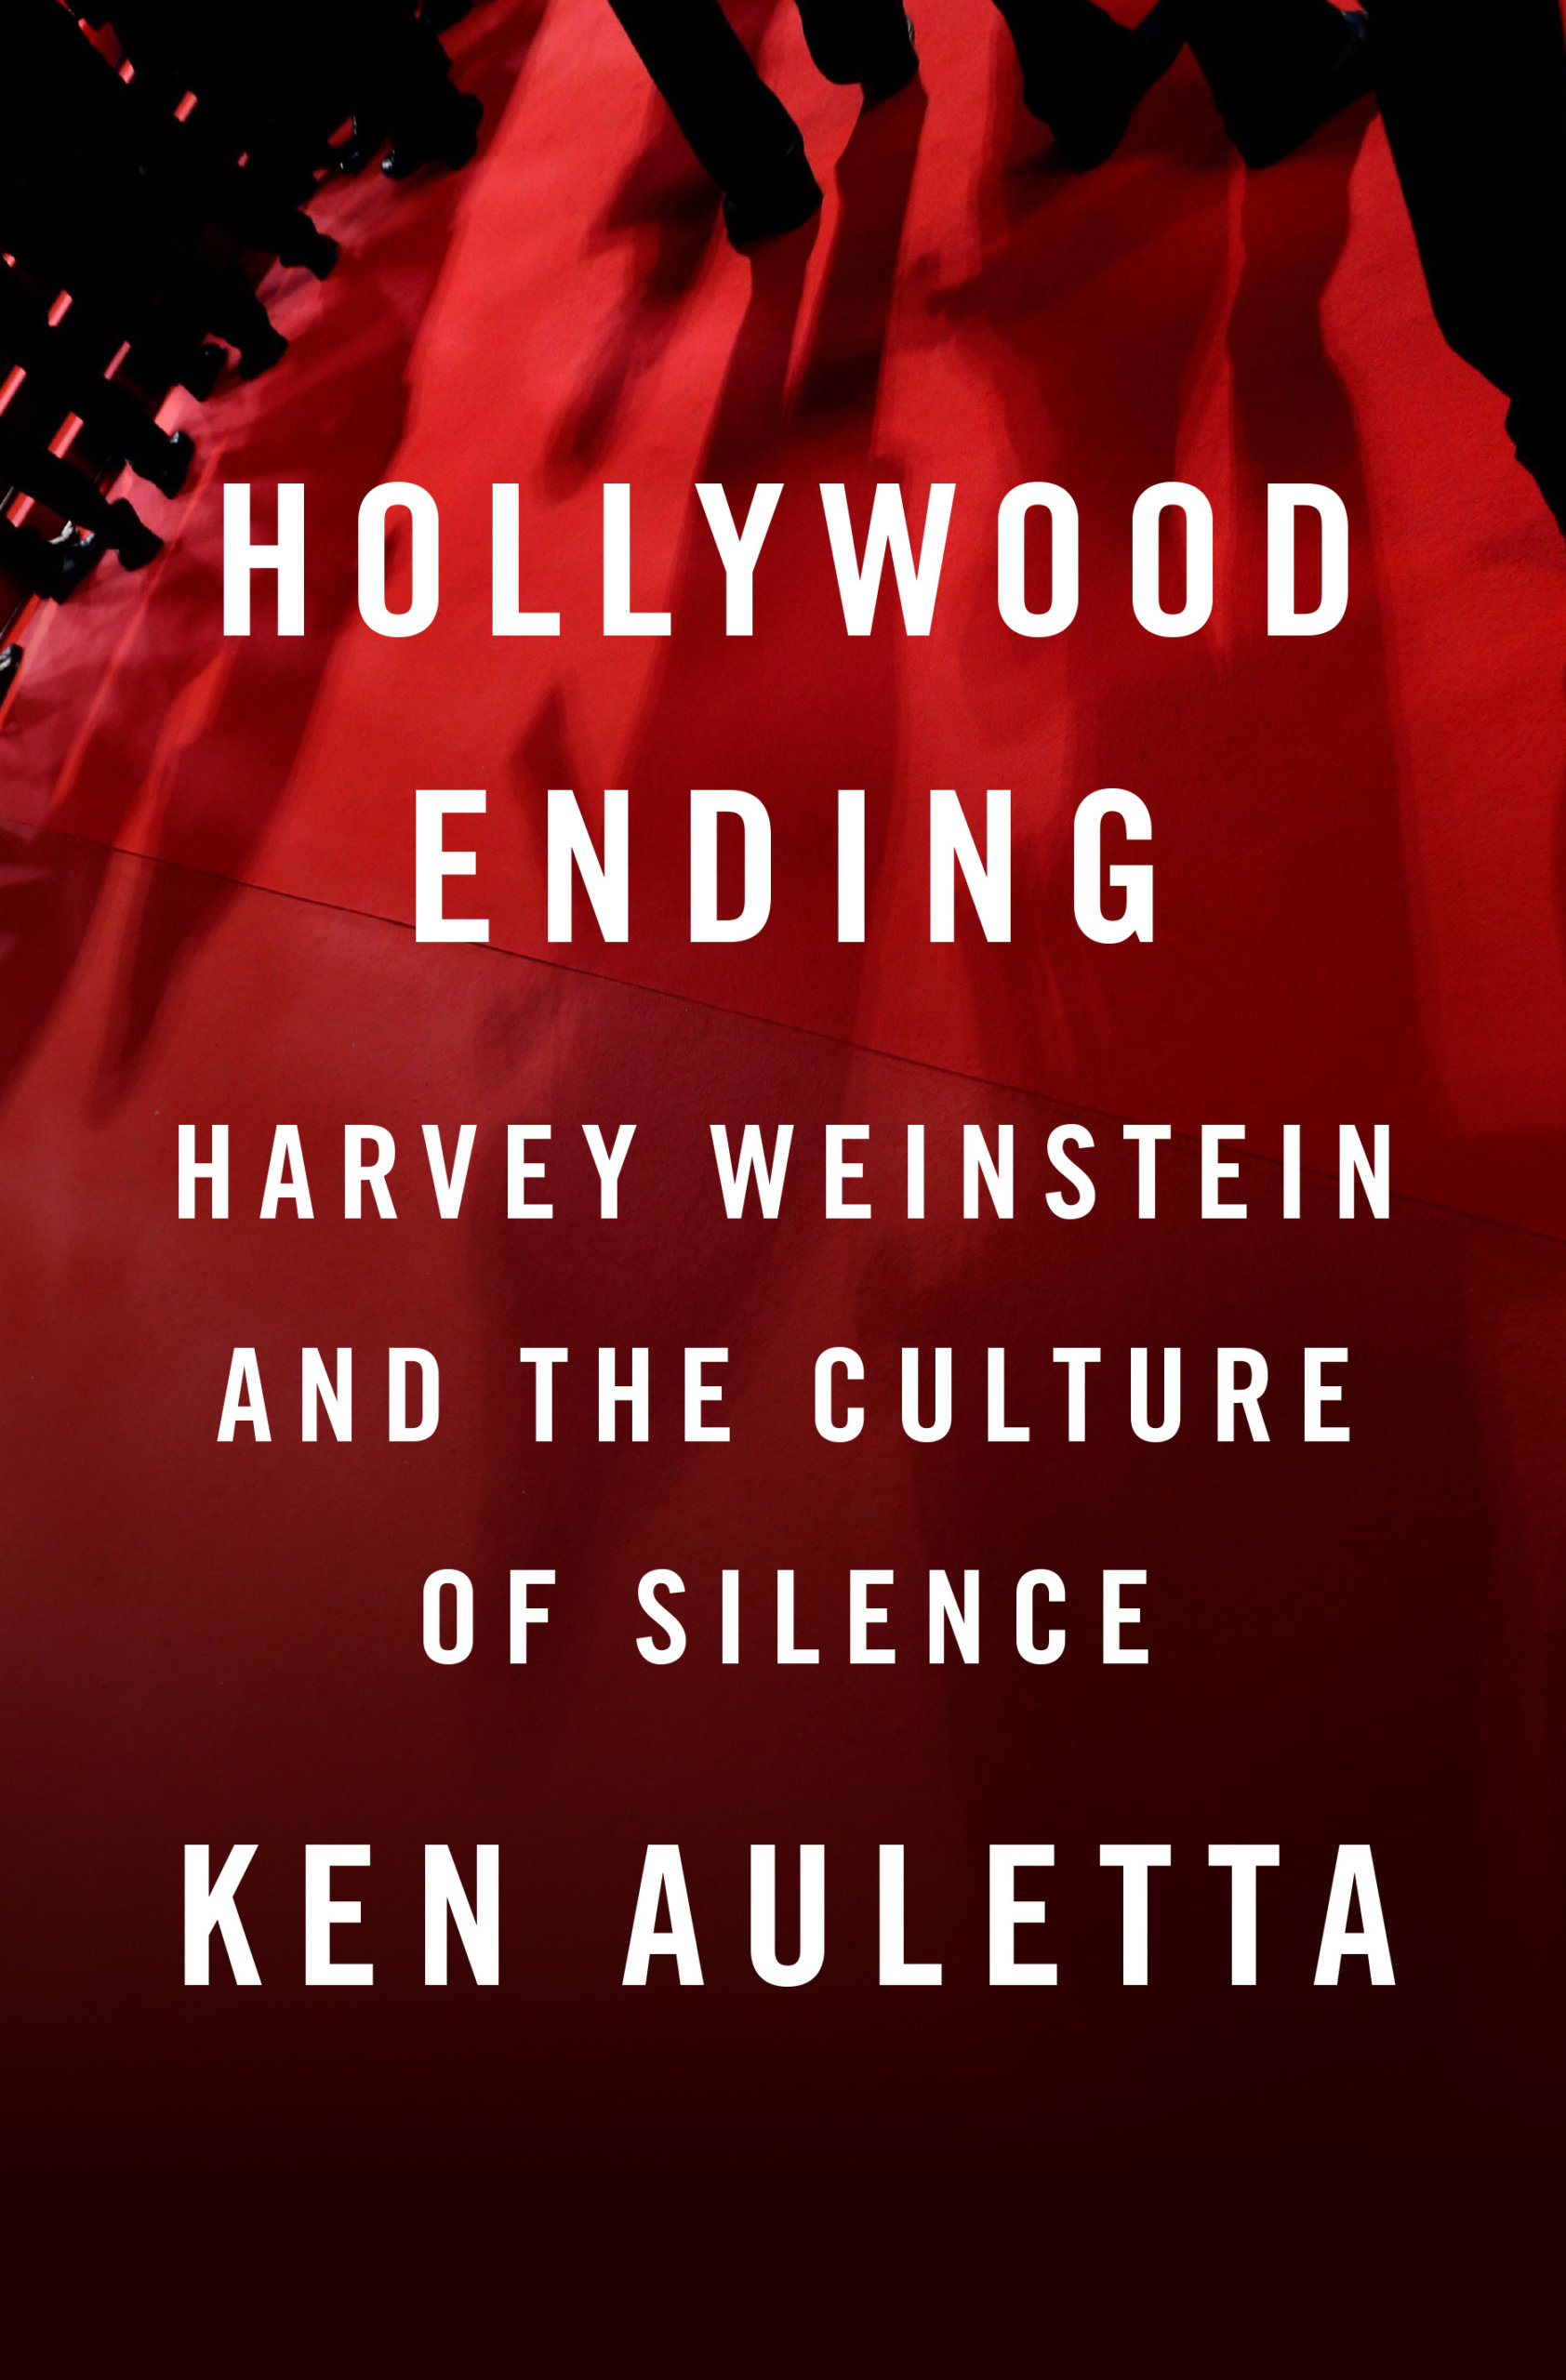 Cover of "Hollywood Ending: Harvey Weinstein and the Culture of Silence" by Ken Auletta